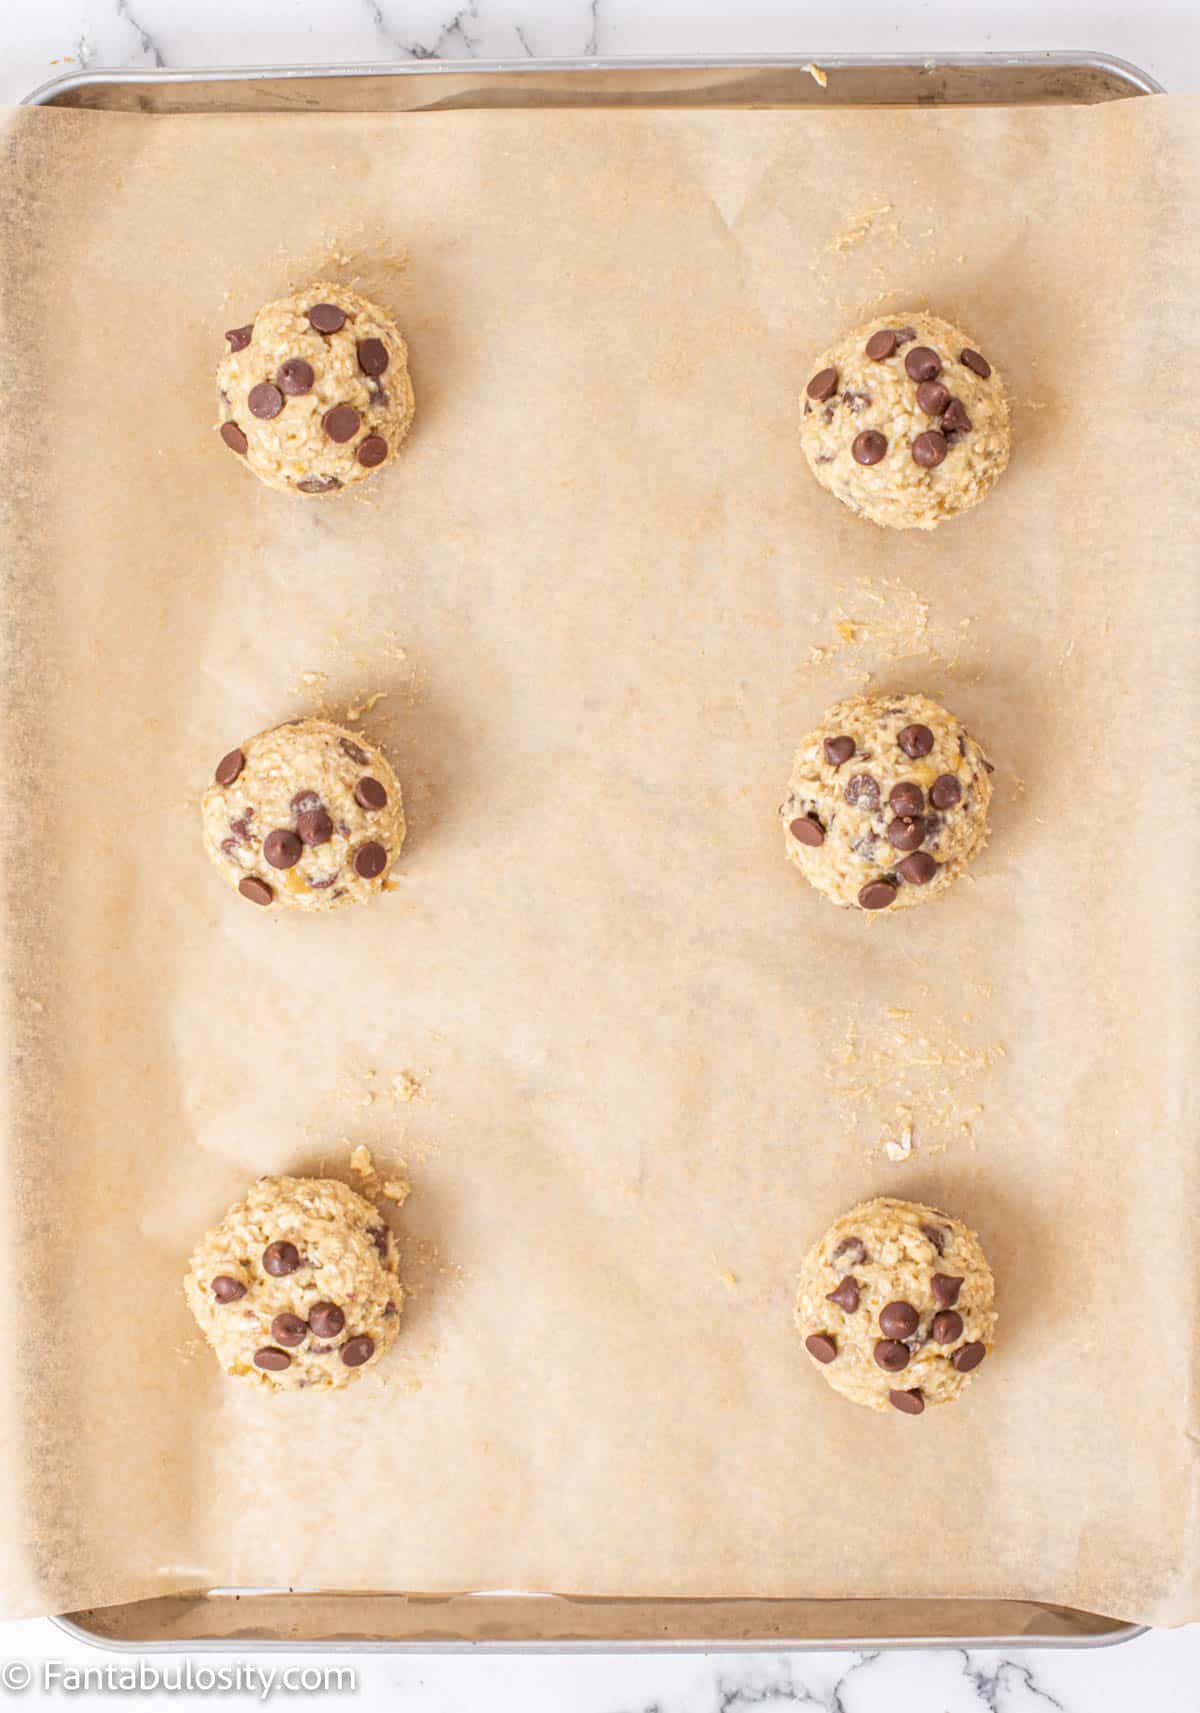 Balls of banana chocolate chip cookie dough on a parchment lined baking sheet.